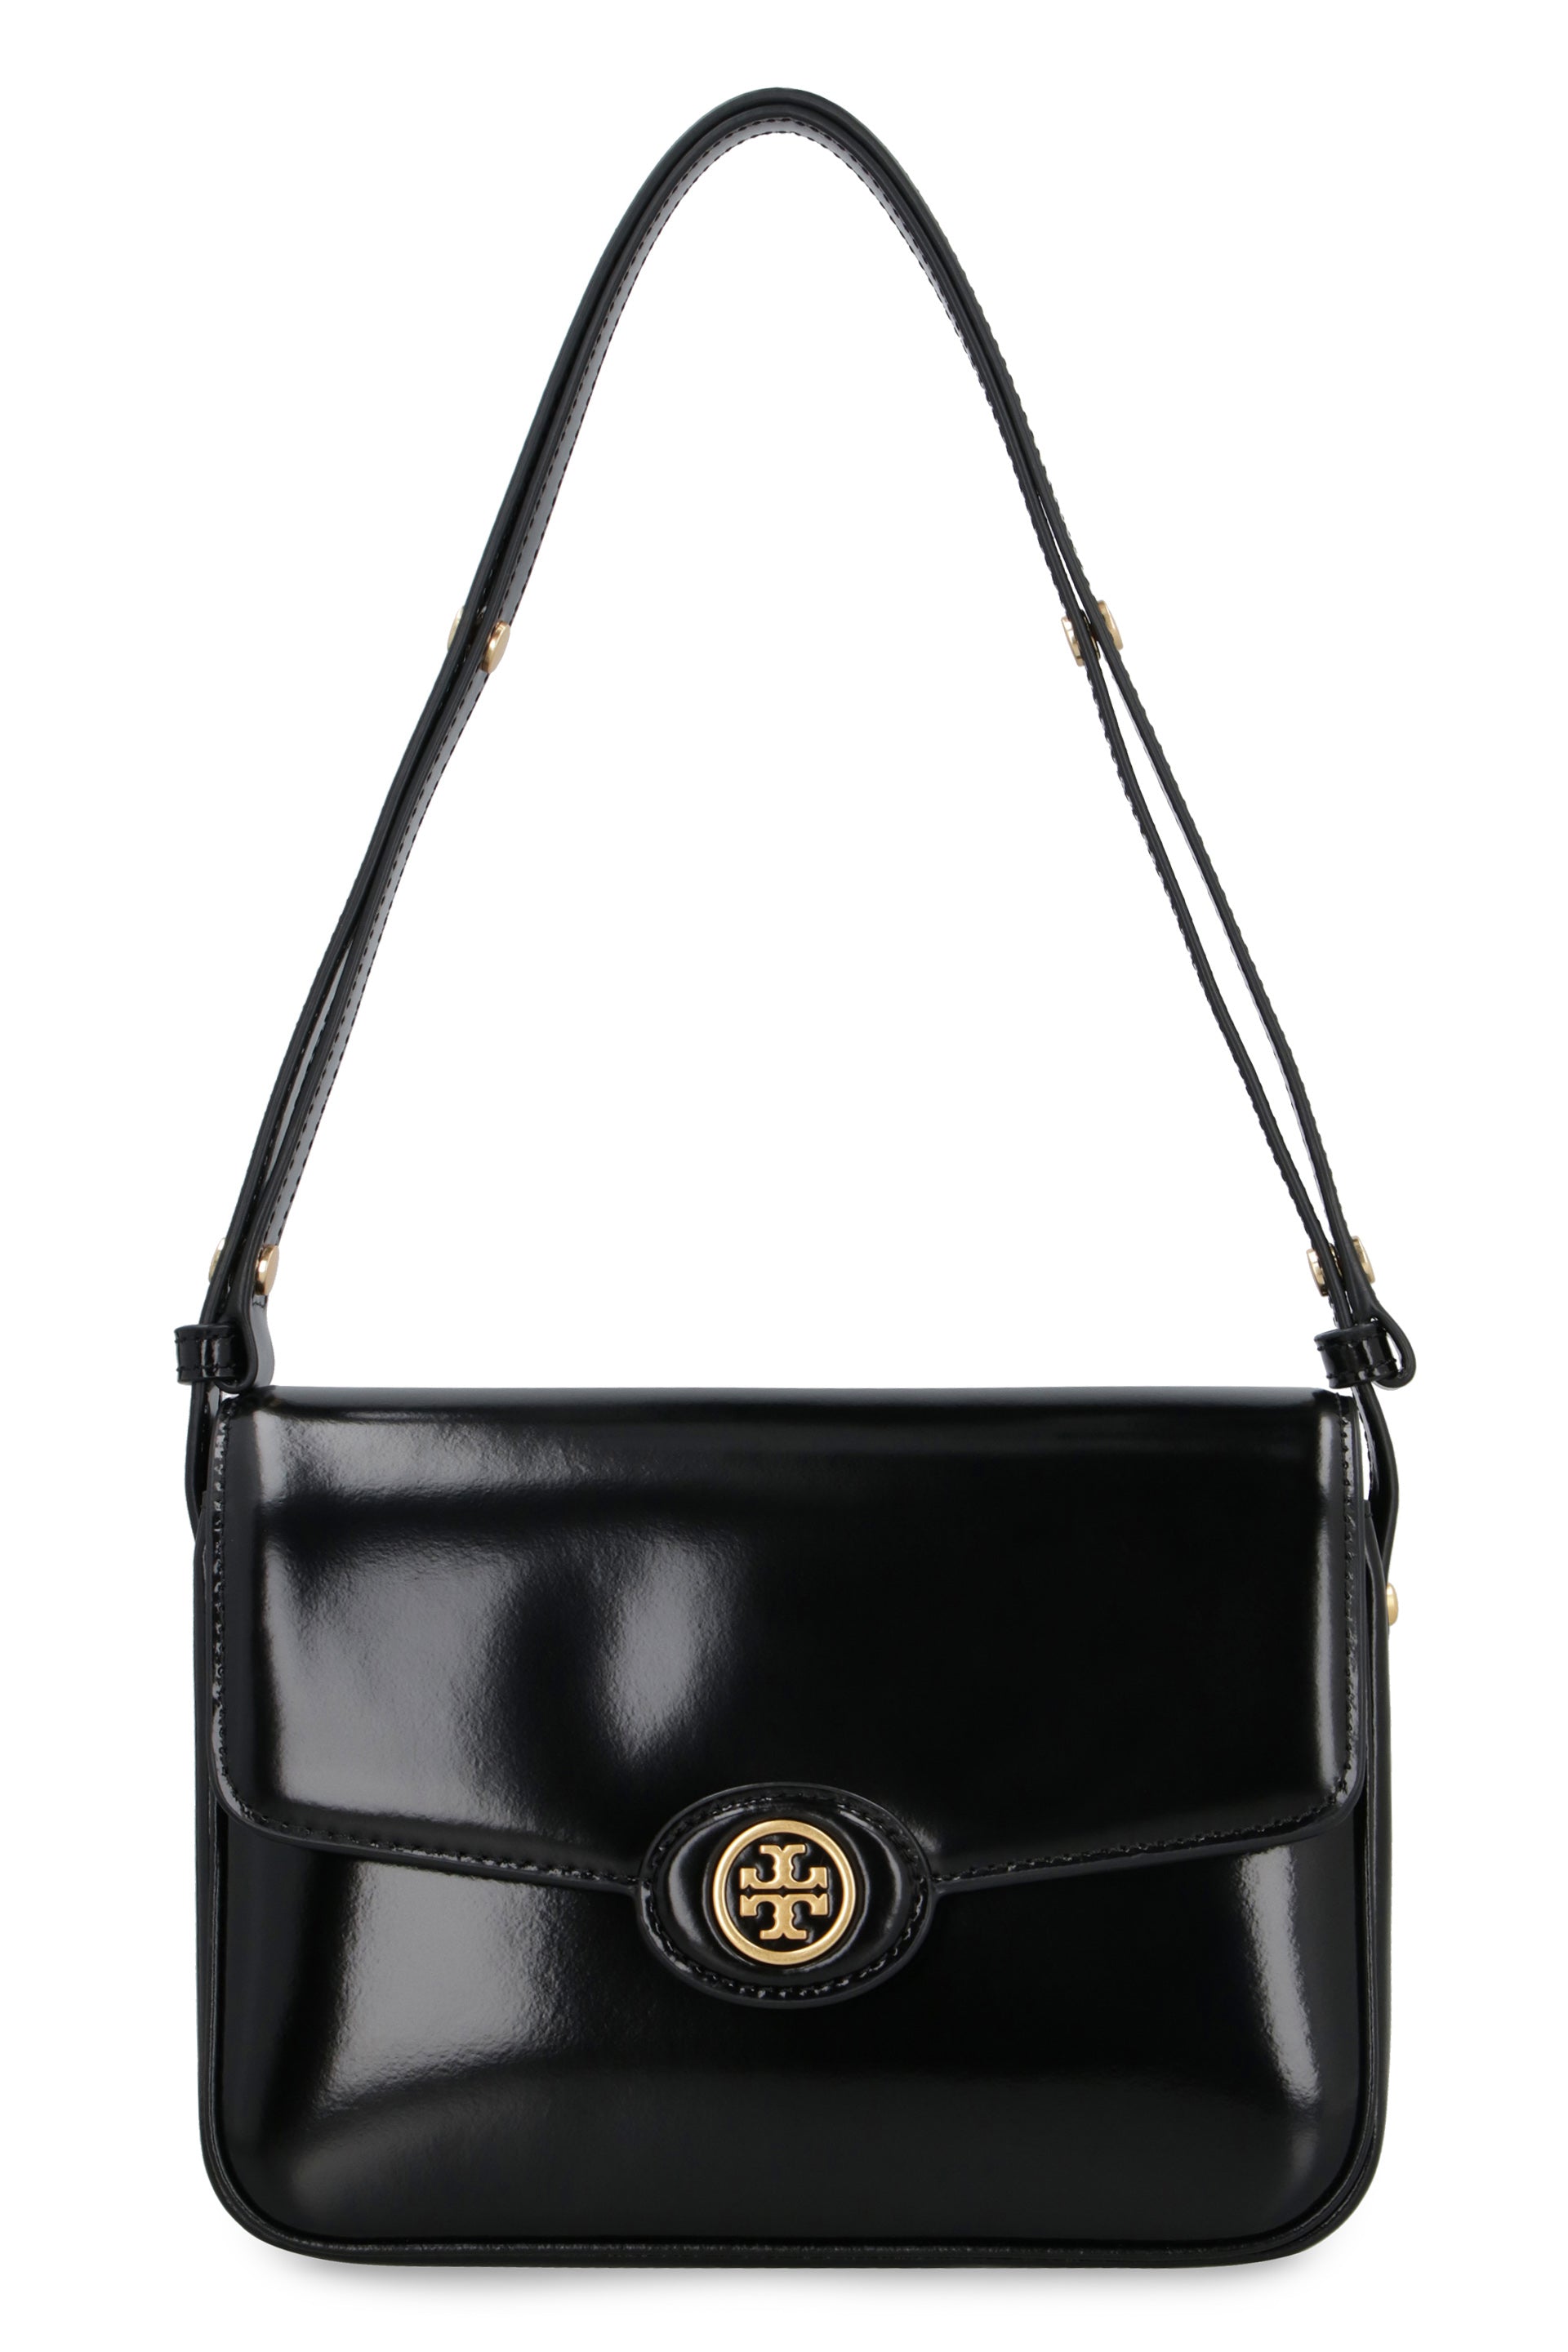 Tory Burch - Robinson leather shoulder bag White - The Corner